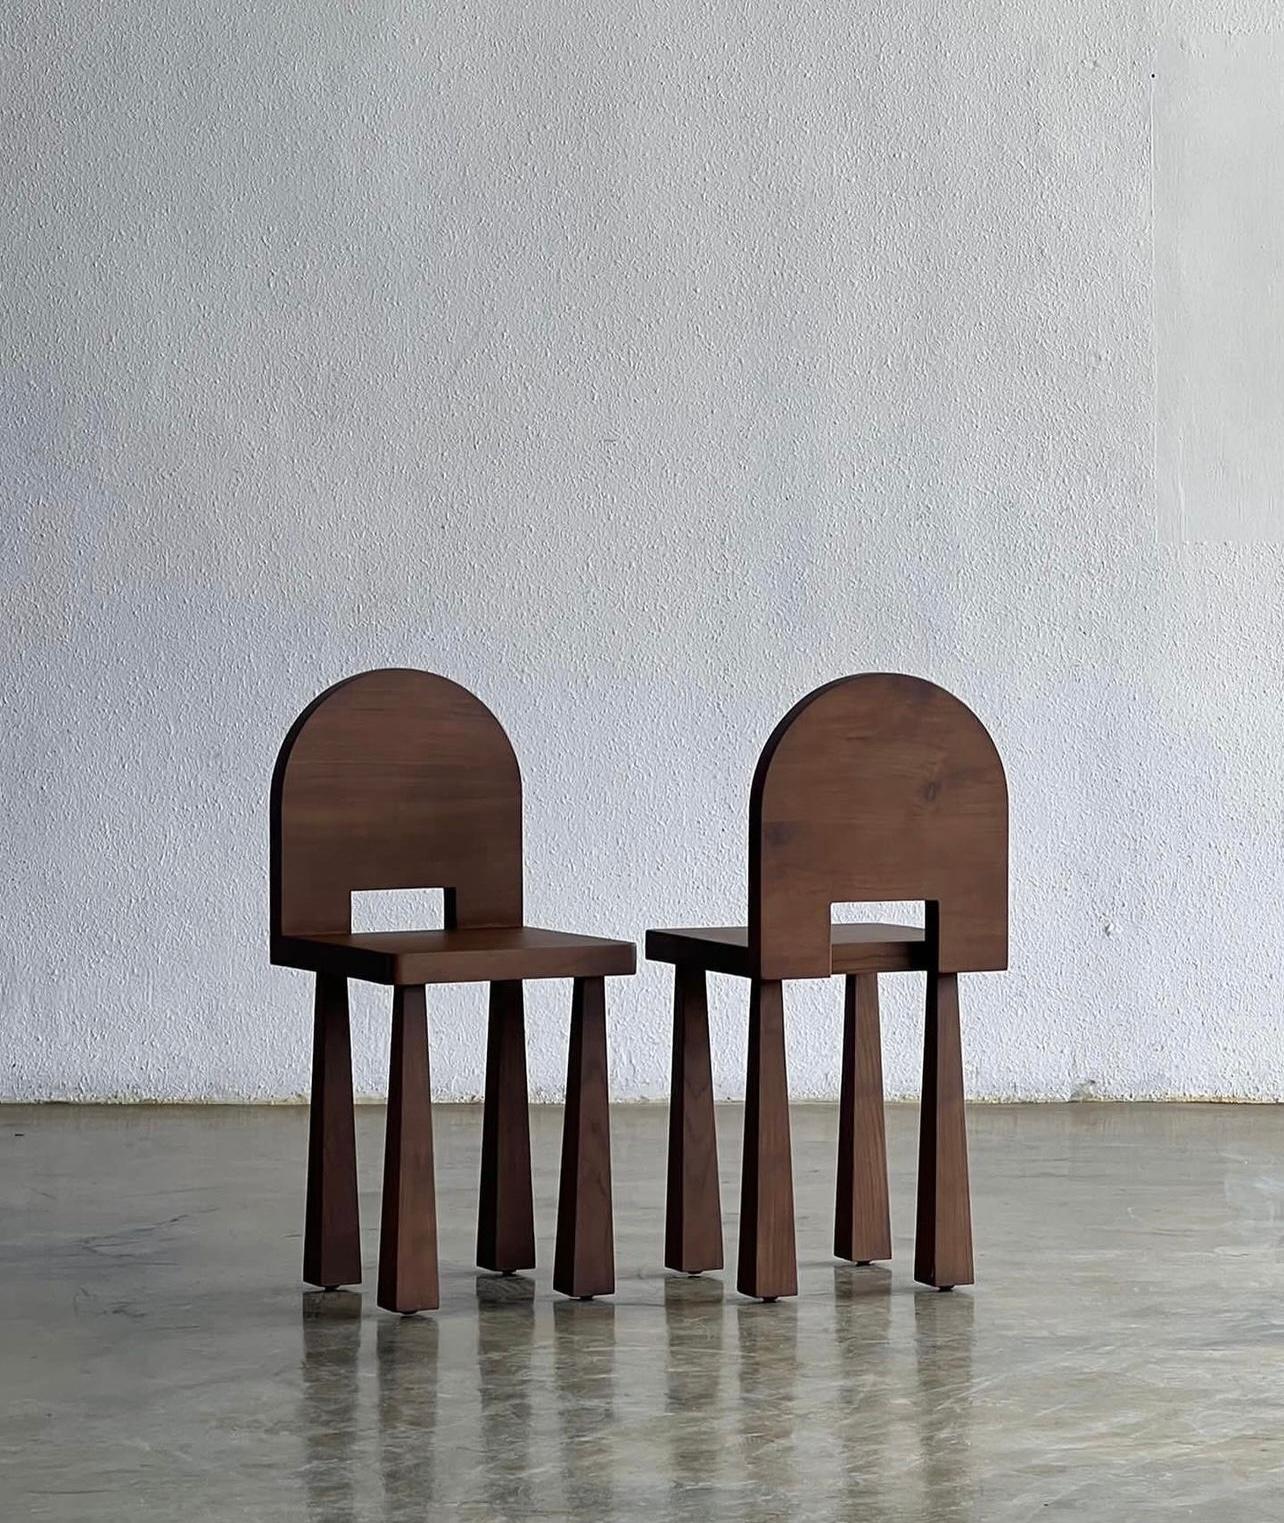 Luna Chair by Studio Kallang
Dimensions: W 37 x D 39 x H 70 cm
Materials: Solid Teak. 

STUDIO KALLANG IS A SINGAPORE AND SEATTLE BASED PROJECT FOCUSING ON OBJECTS DESIGNED BY FAEZAH SHAHARUDDIN.
PIECES ARE PLAYFUL EXPLORATIONS IN FORM, MATERIALITY